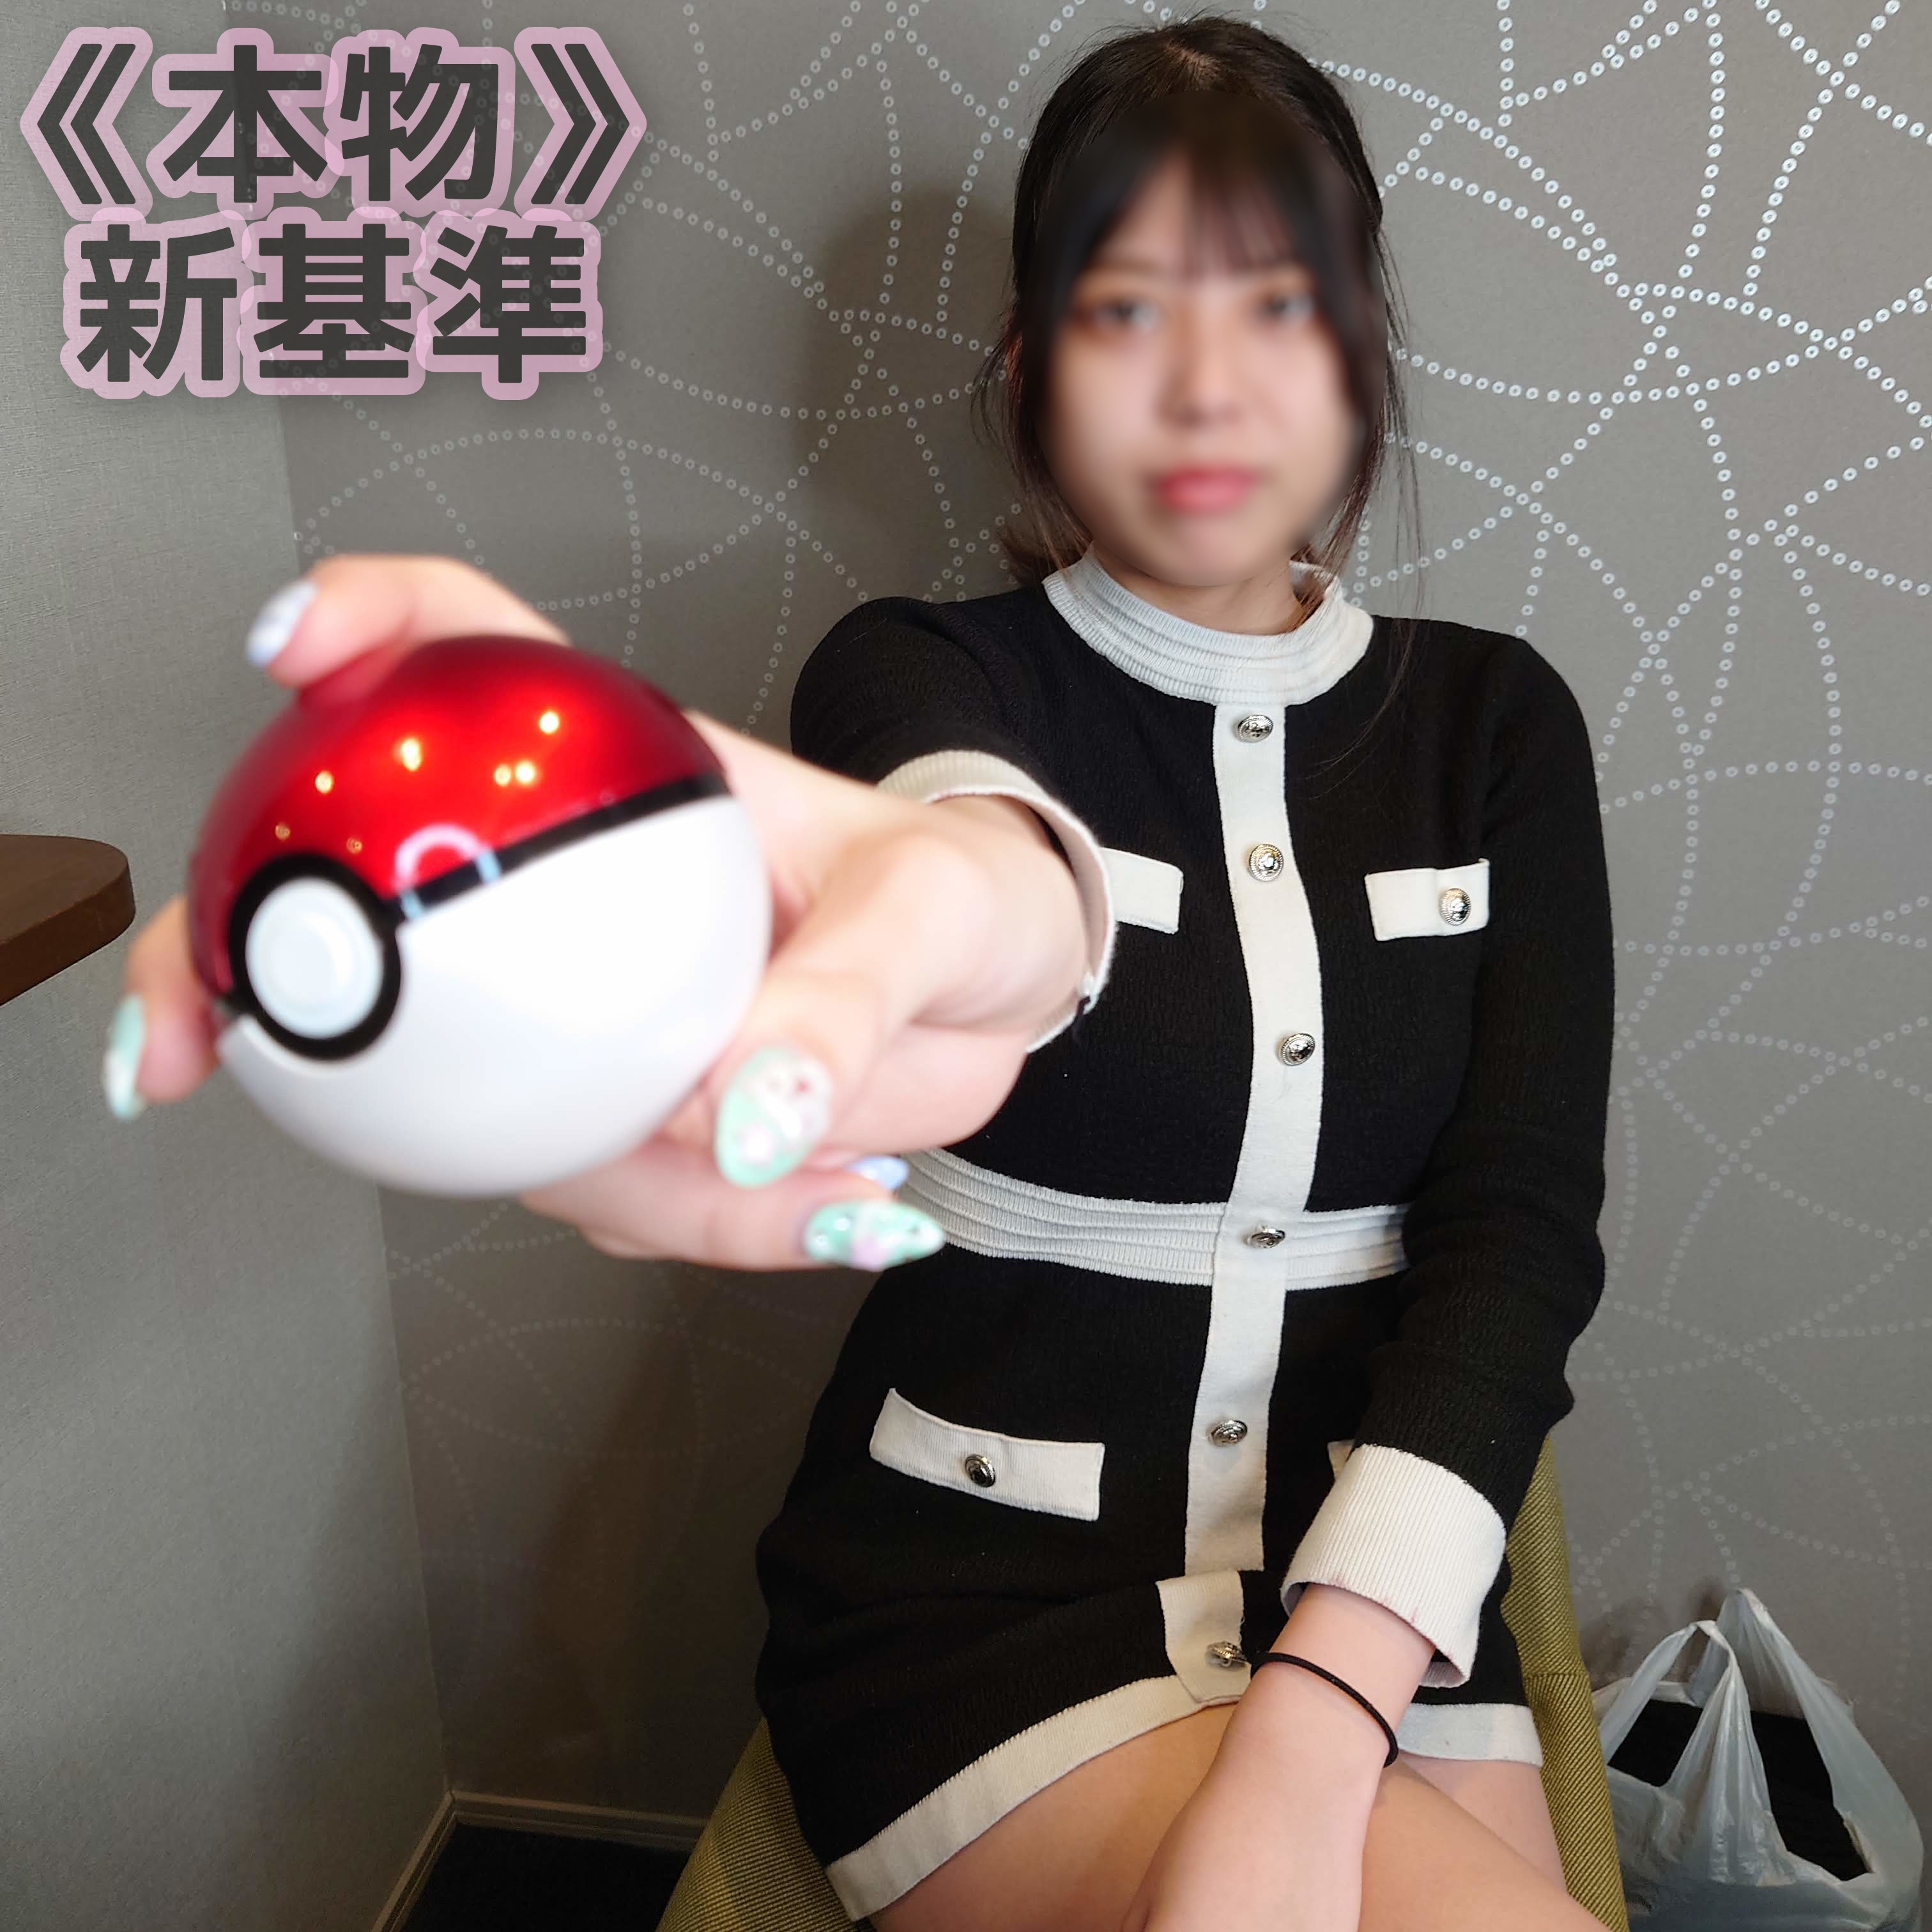 Complete appearance first shooting Uncensored Perfect bowl-shaped boobs are Untouched beauty big breasts E cup Unauthorized vaginal cum shot 2 barrage to innocent idol class 18 years old who loves Pokemon Complete original individual shooting